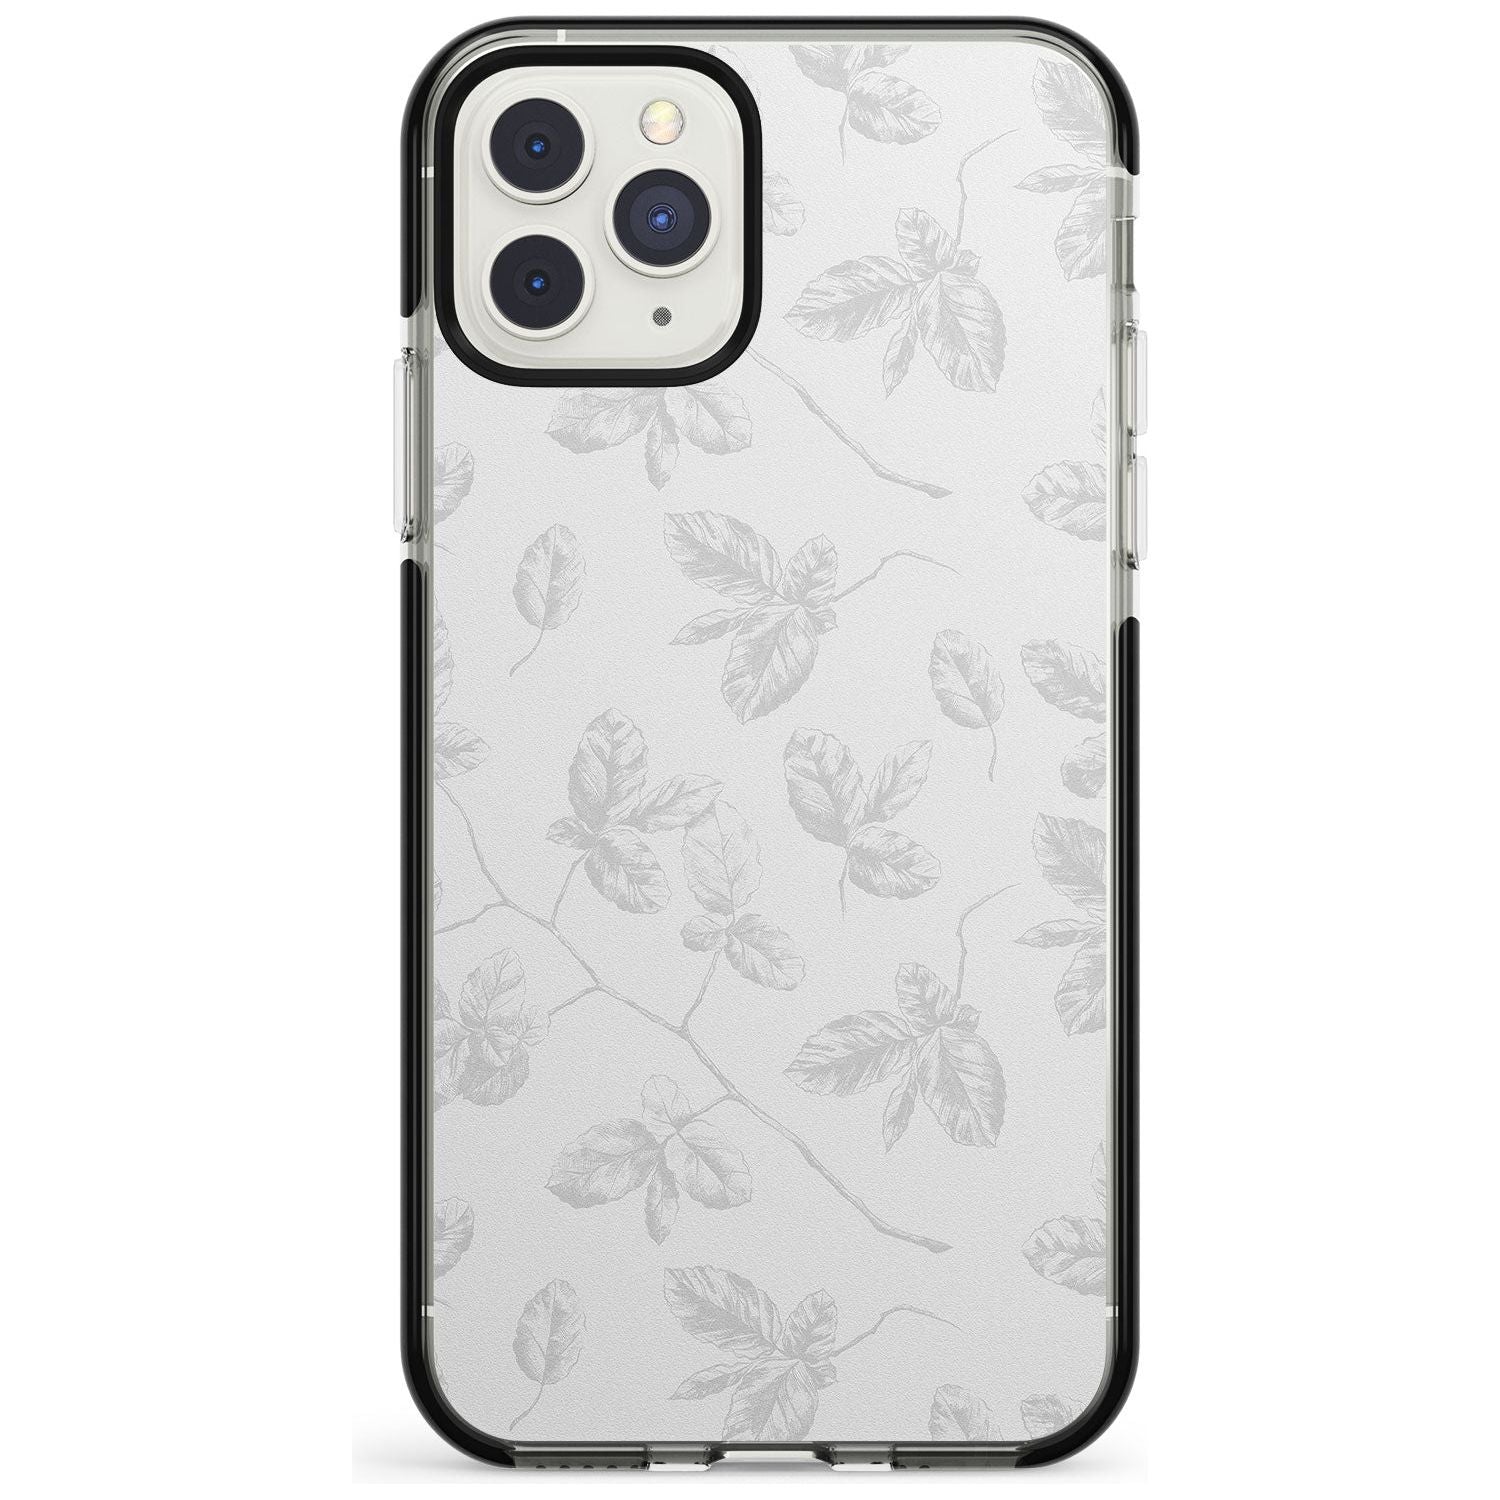 Grey Branches Vintage Botanical Black Impact Phone Case for iPhone 11 Pro Max